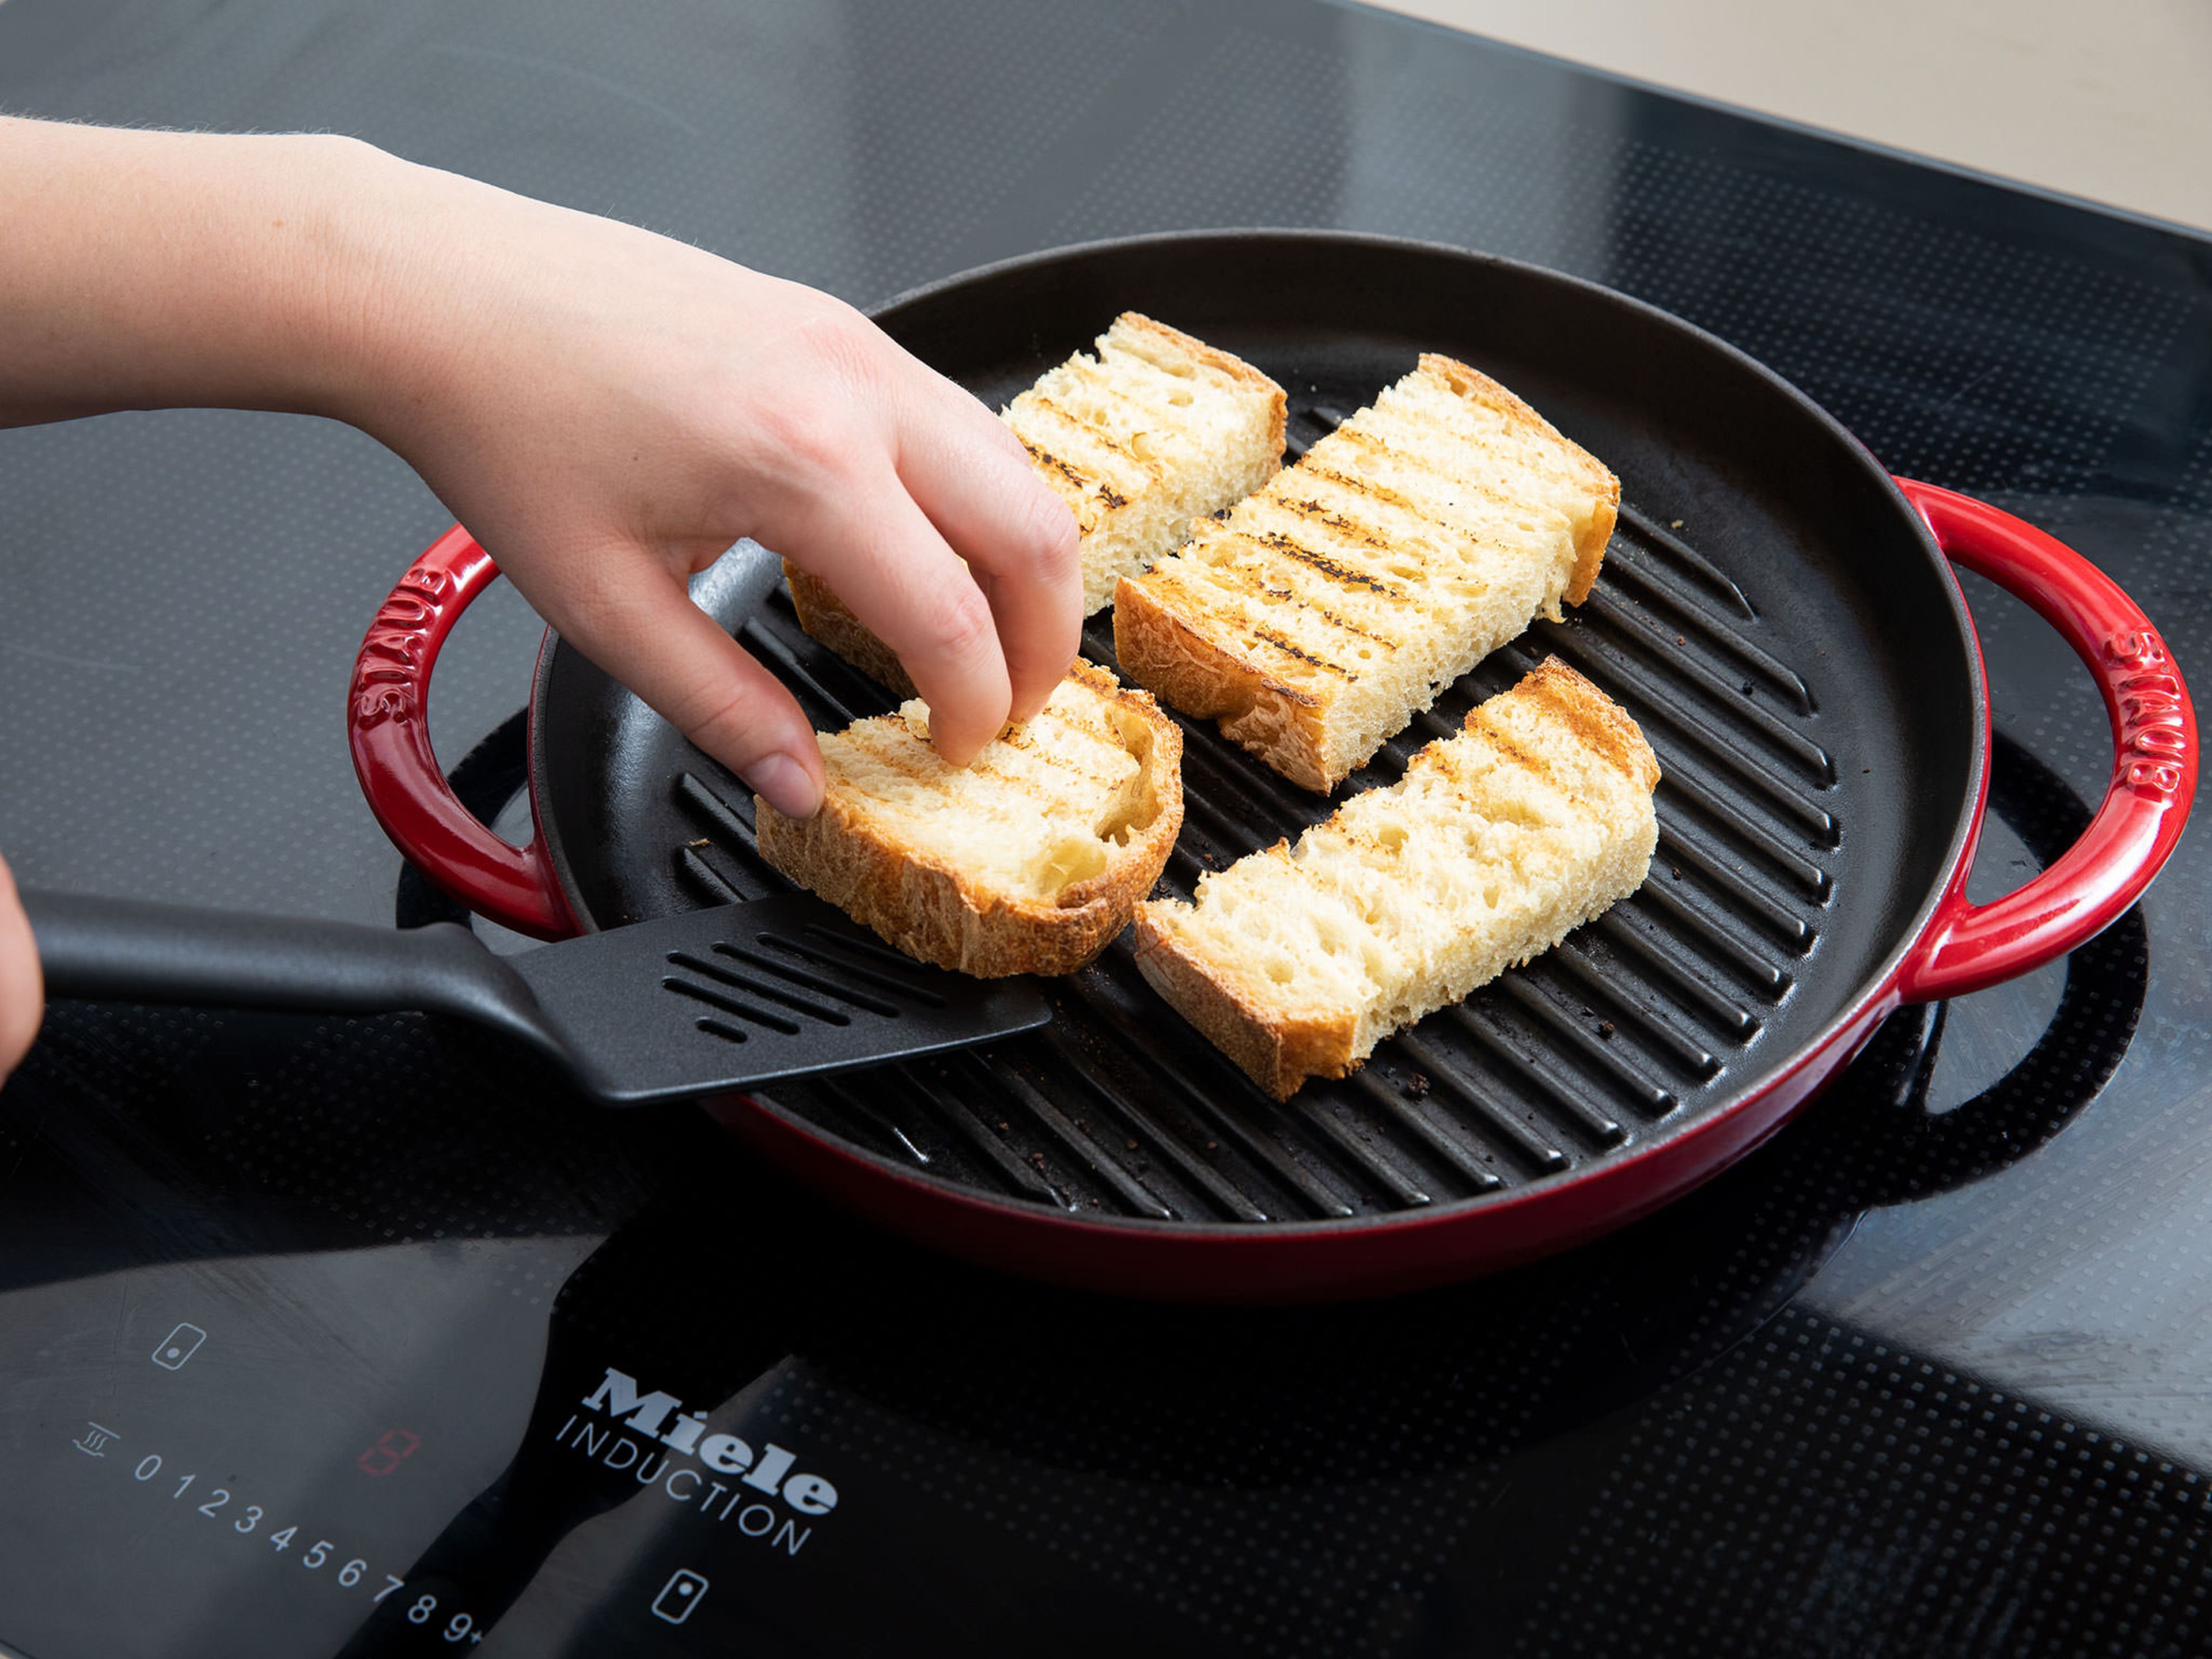 Cut bread to desired size. Toast bread in grill pan over medium-high heat.